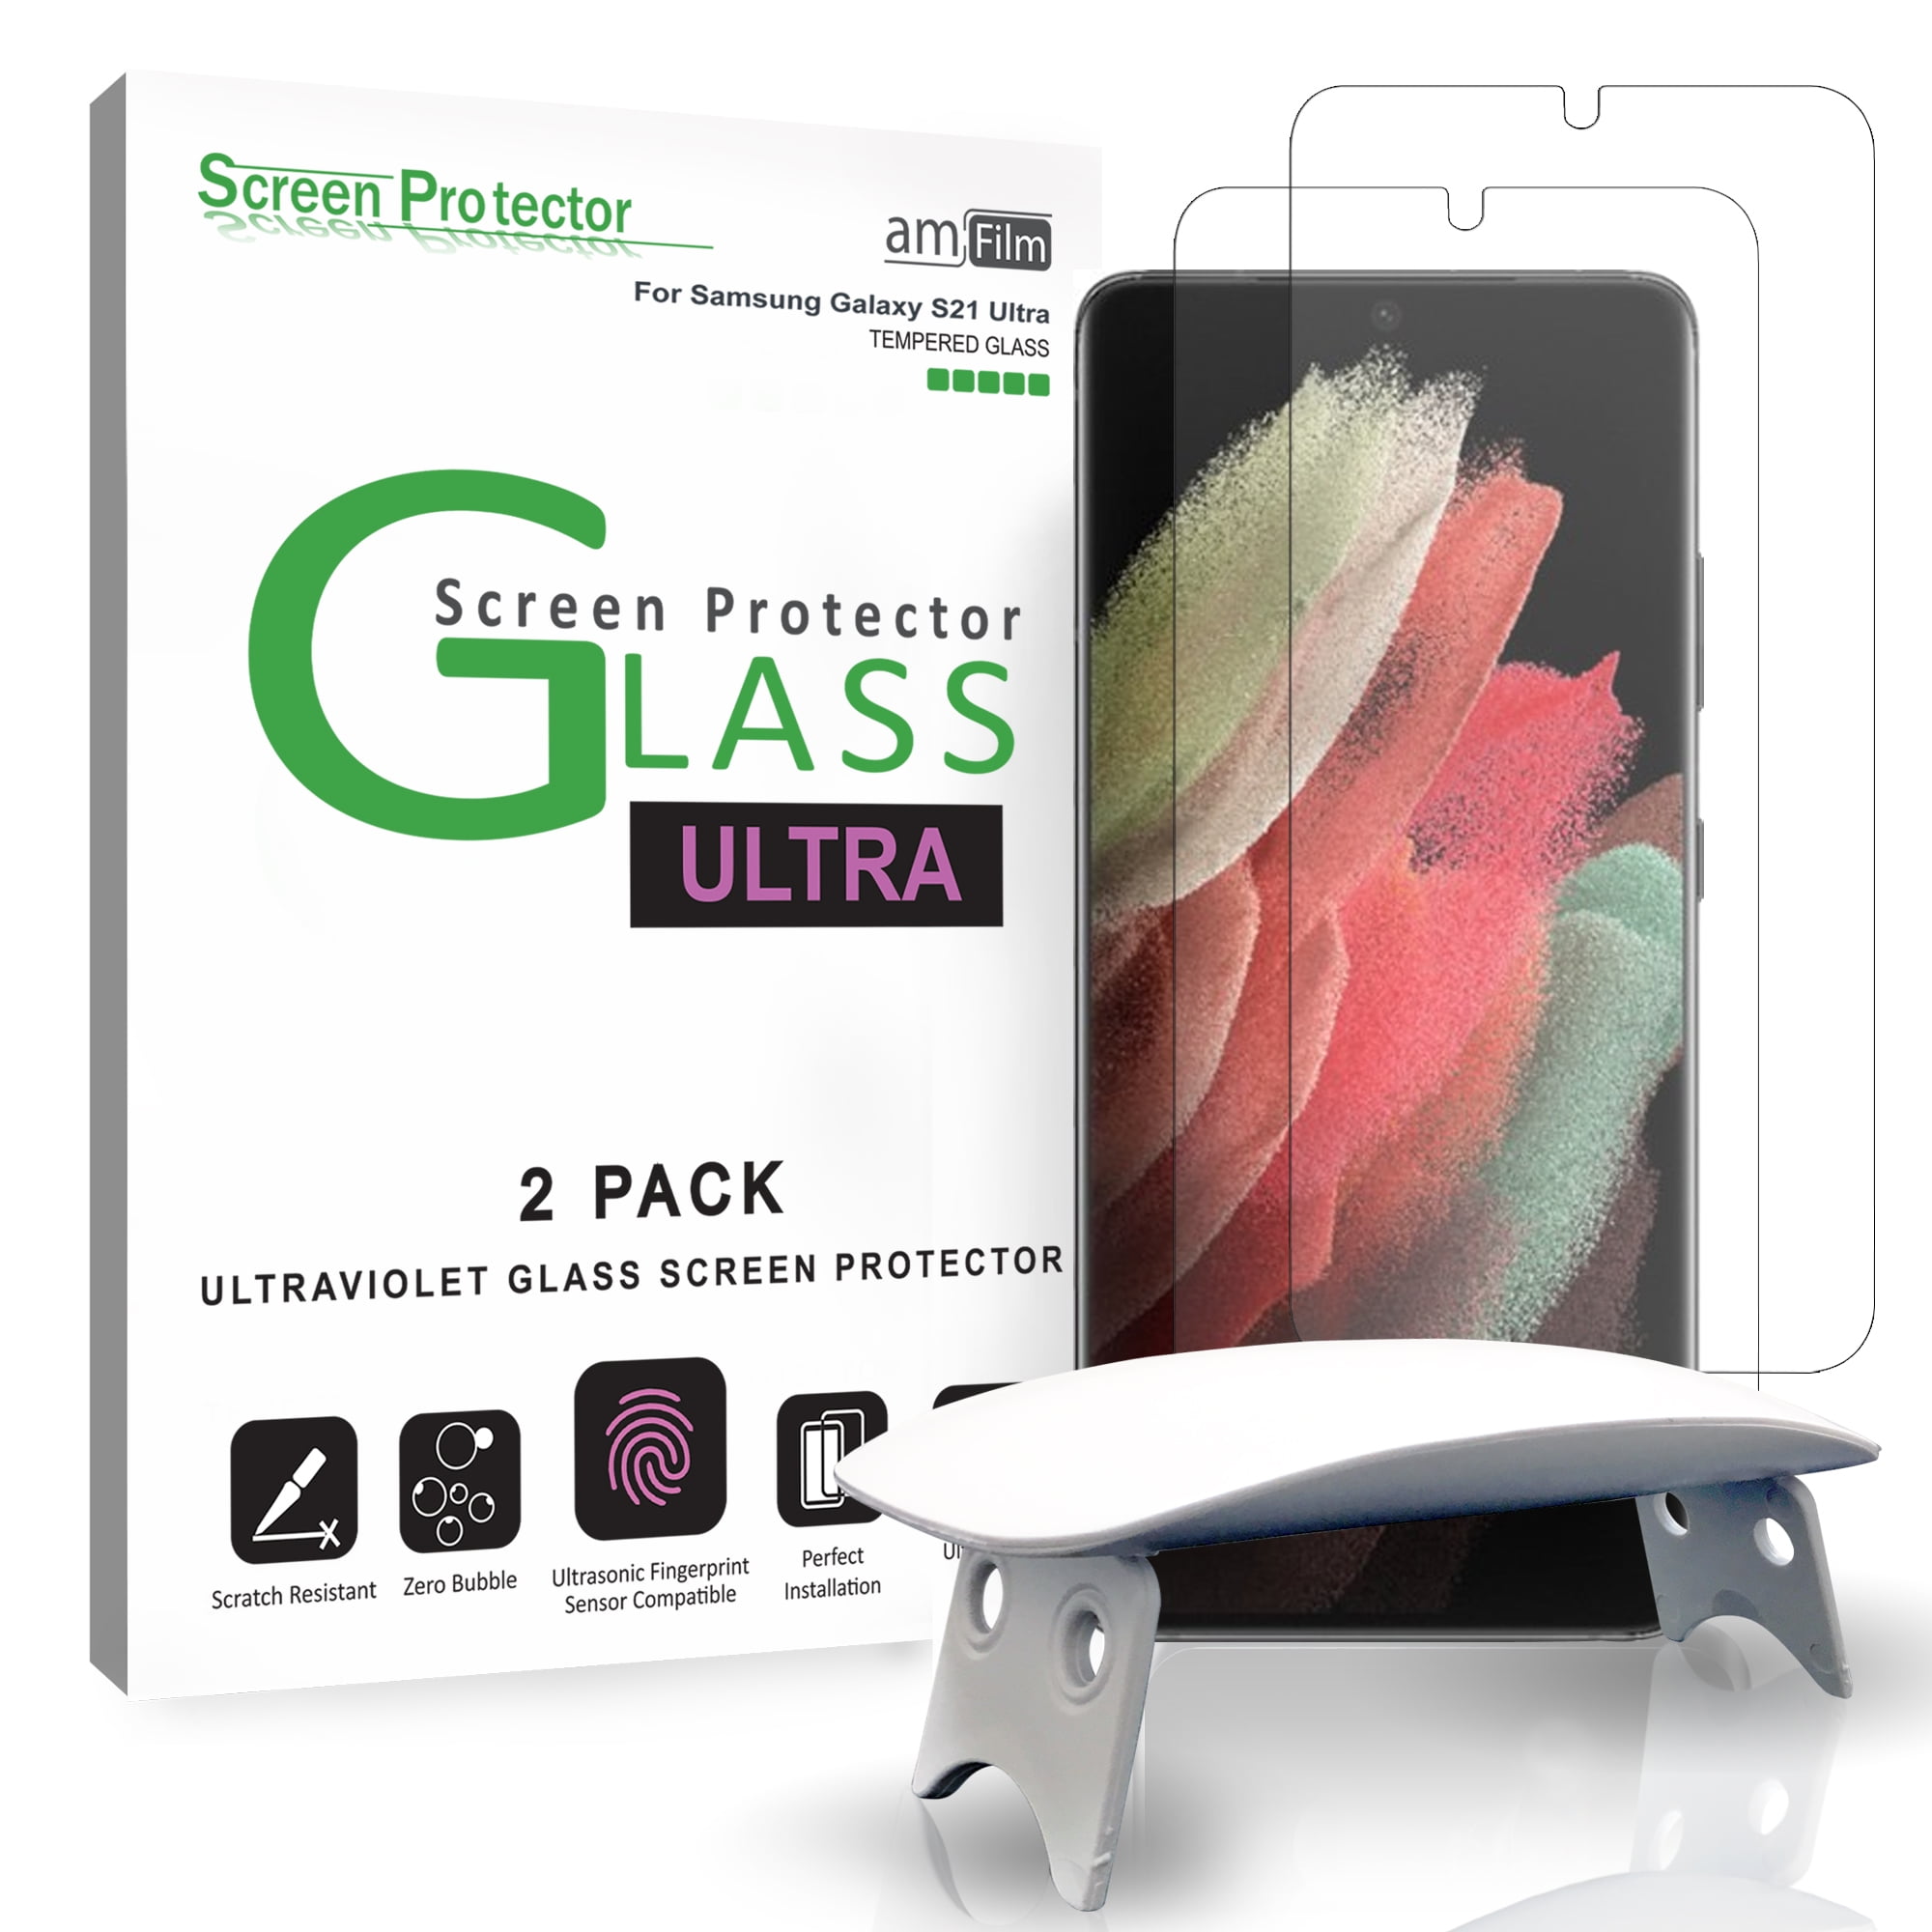 Galaxy S21 Ultra Tempered Glass Screen Protector for Samsung Galaxy S21 Ultra 5G 3 Pack Easy Install UV light-3D Curved High transparency UltraSonic Fingerprint 